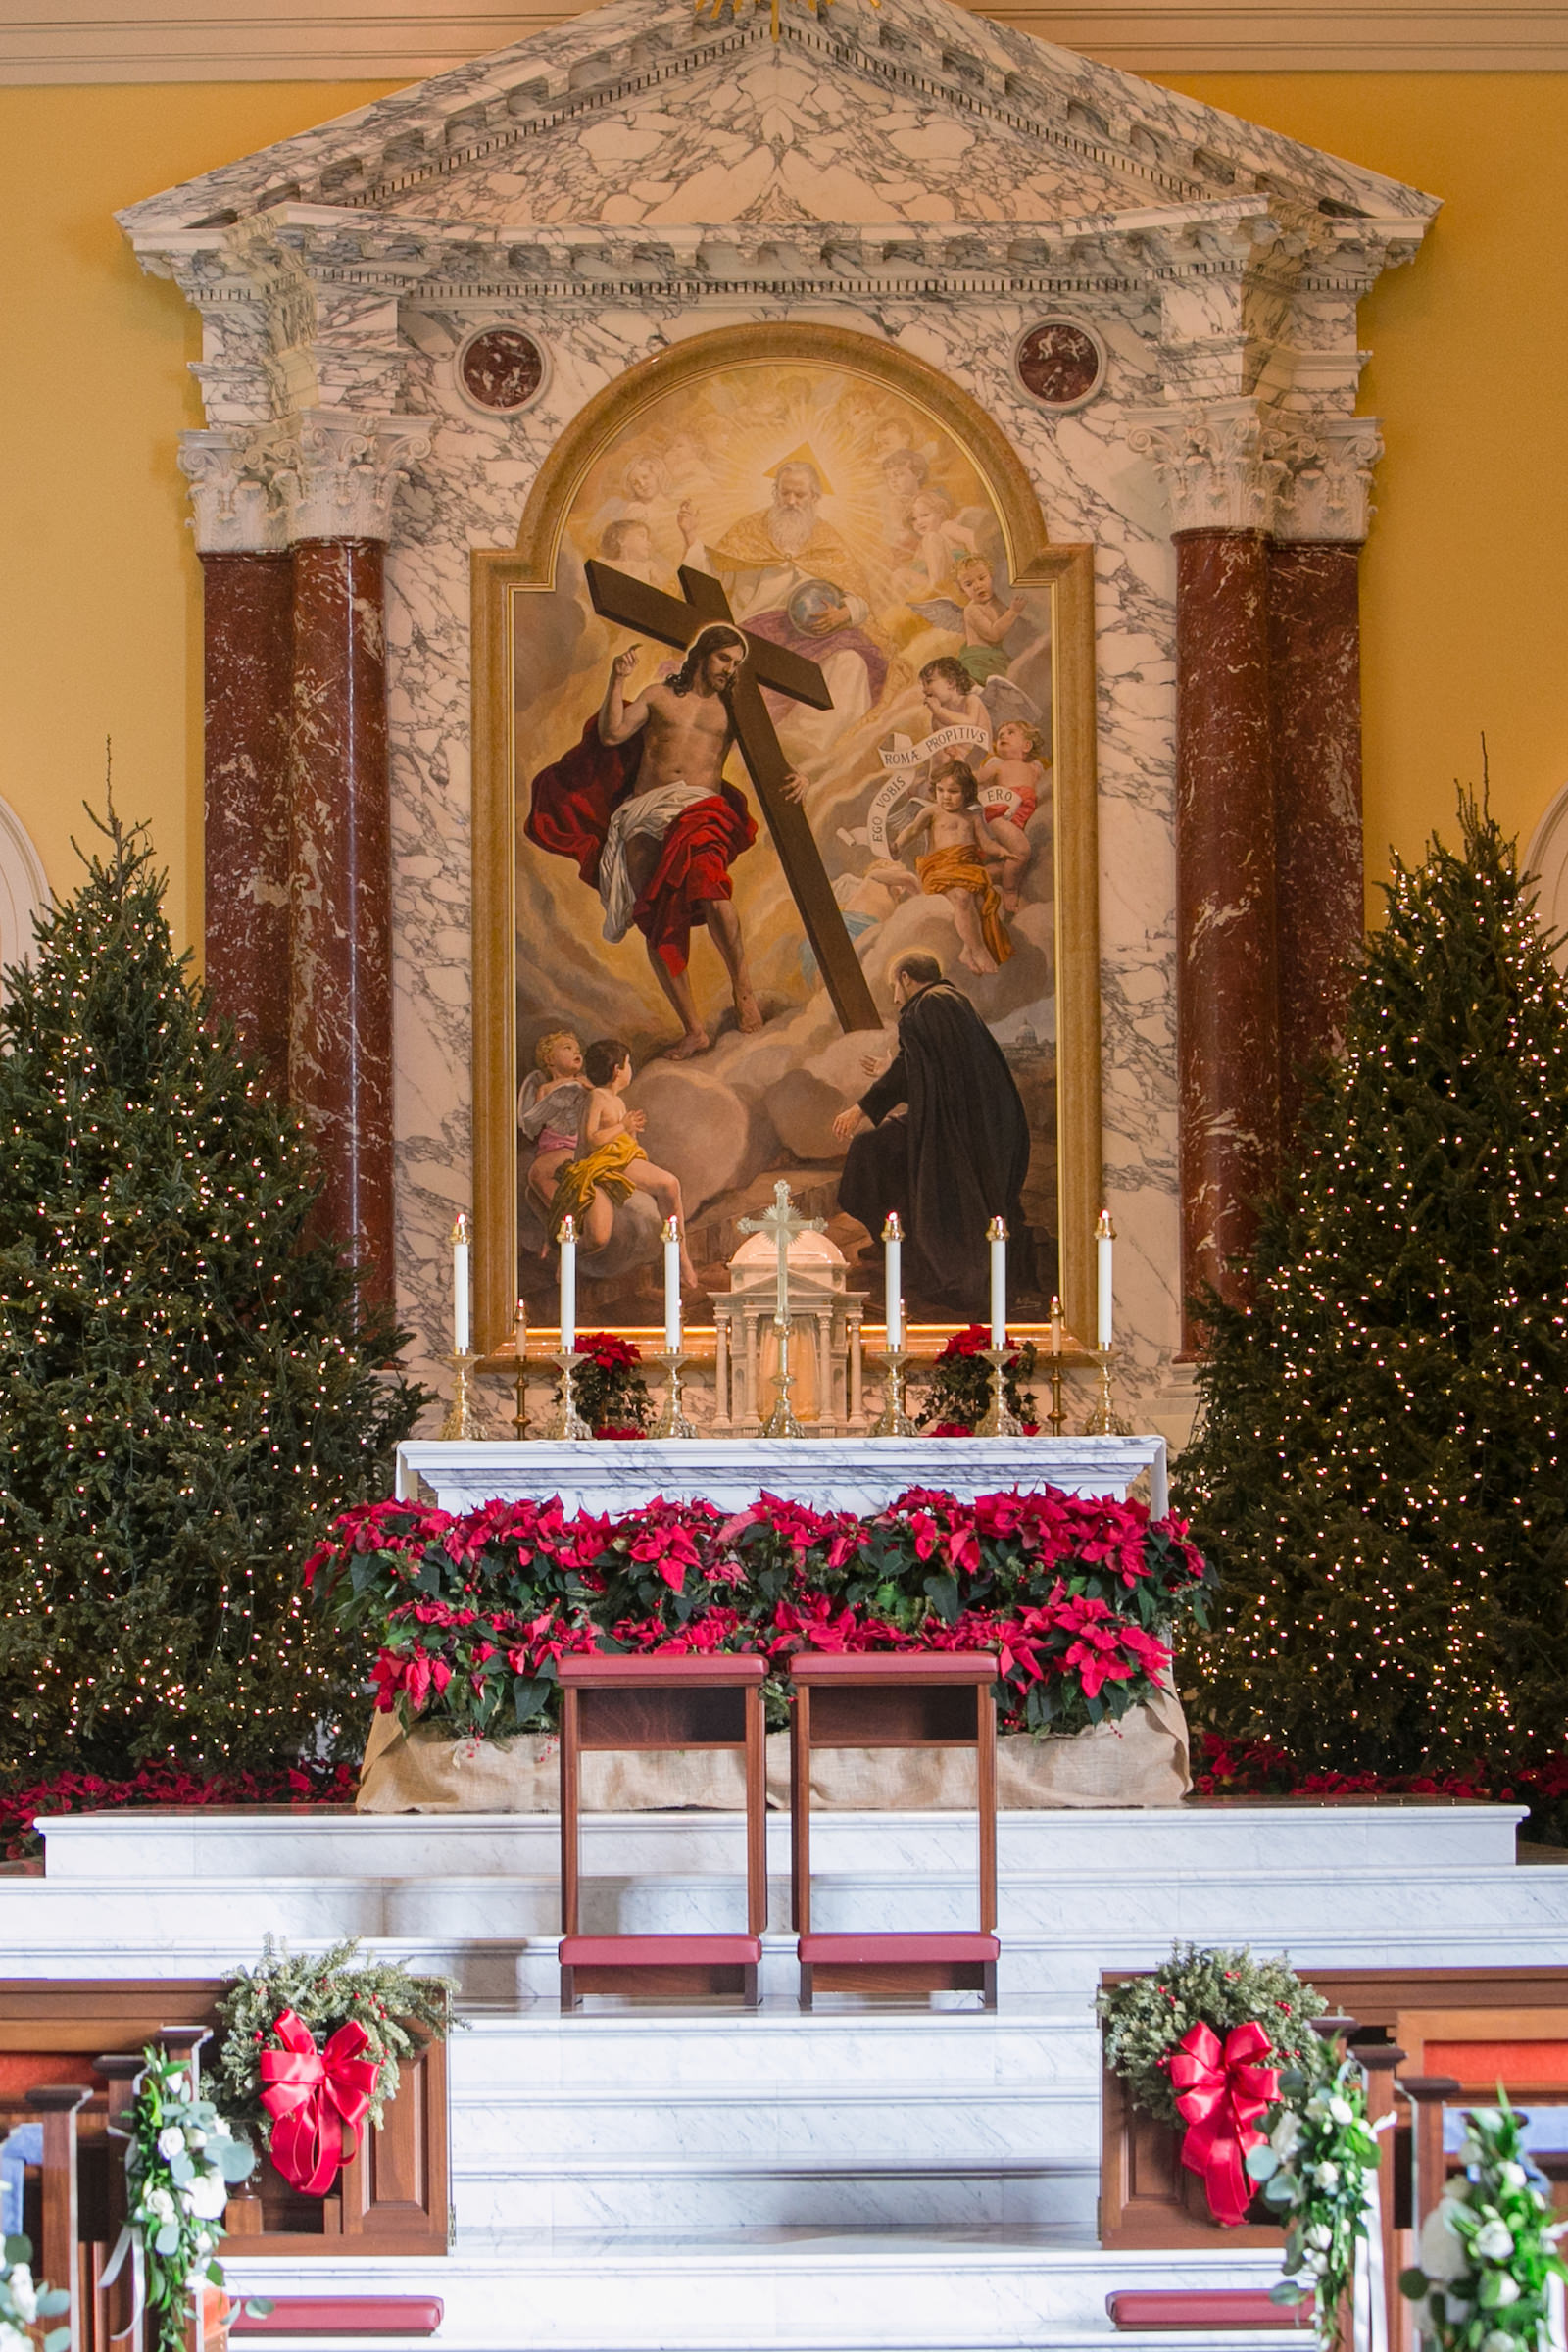 Green and Gold Christmas Wedding Decor, Pine Tree with Lights, Red Poinsettas, Candlesticks at Altar Traditional Wedding Church Ceremony | Tampa Wedding Venue Jesuit High School: Chapel of the Holy Cross